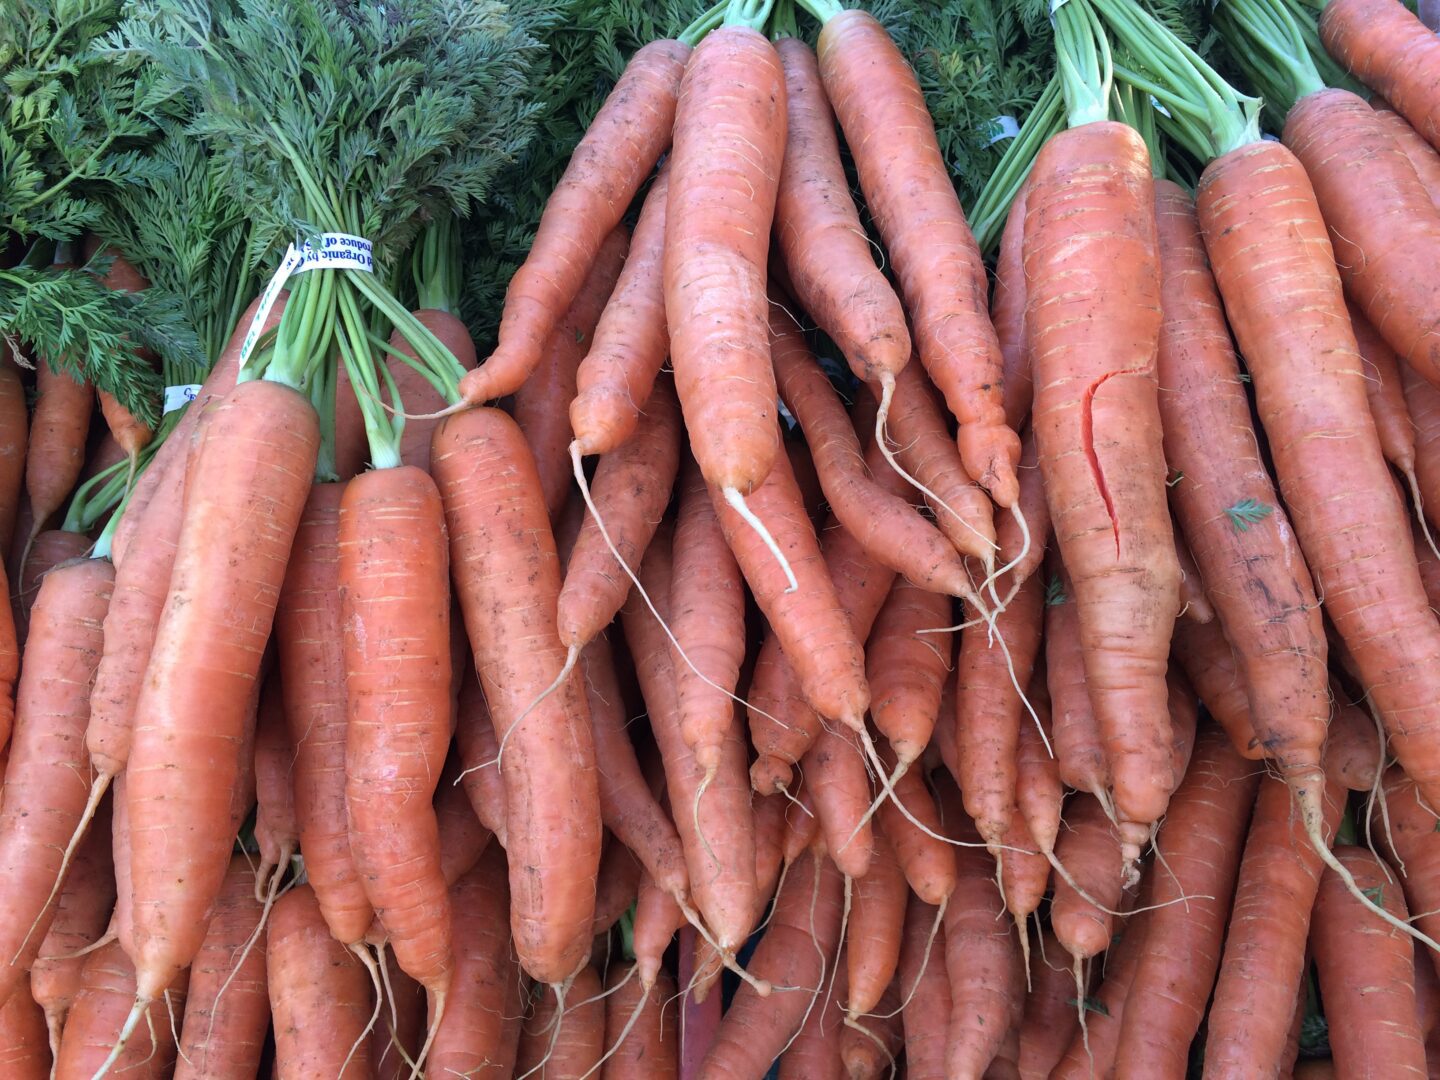 A bunch of carrots are piled up on a table.